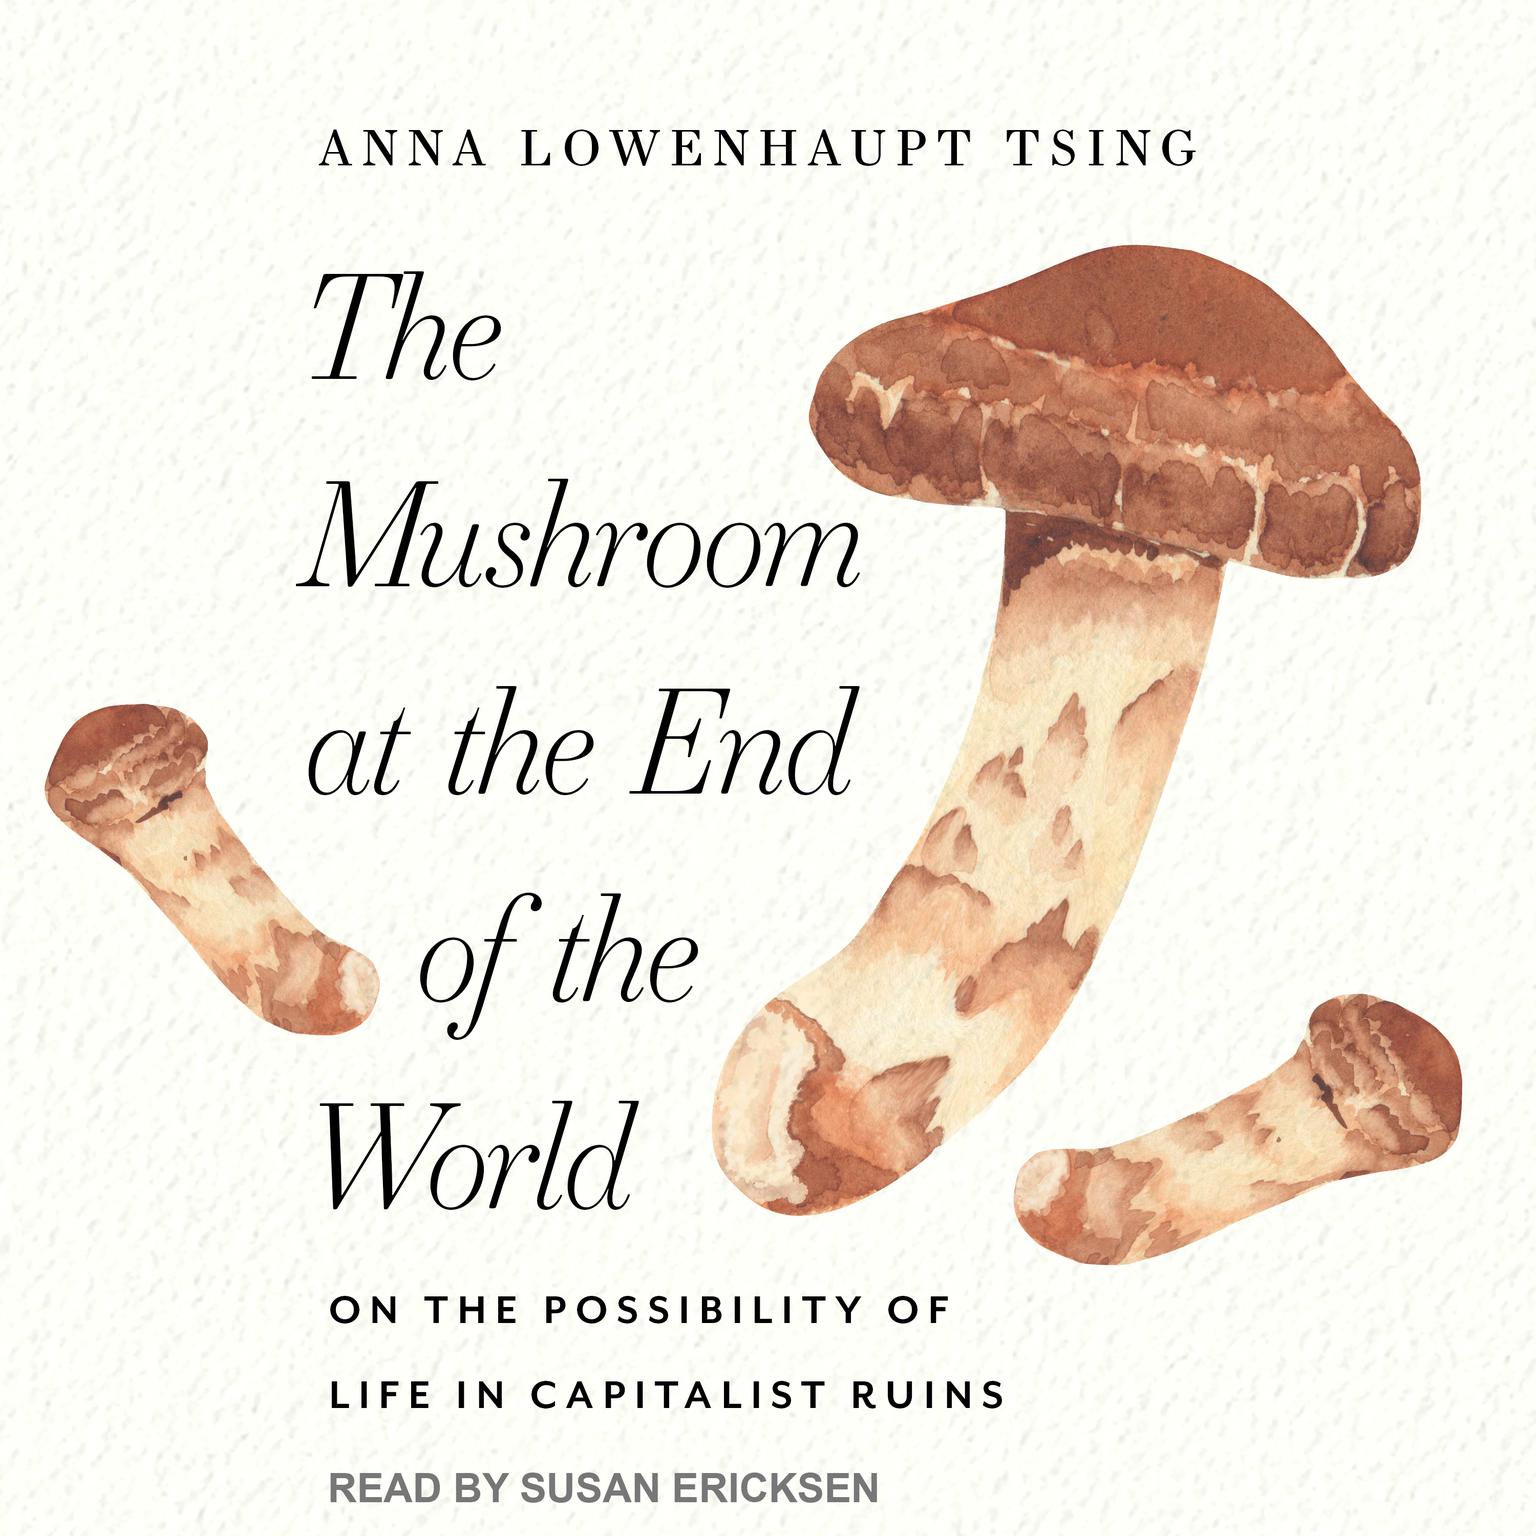 The Mushroom at the End of the World: On the Possibility of Life in Capitalist Ruins Audiobook, by Anna Lowenhaupt Tsing